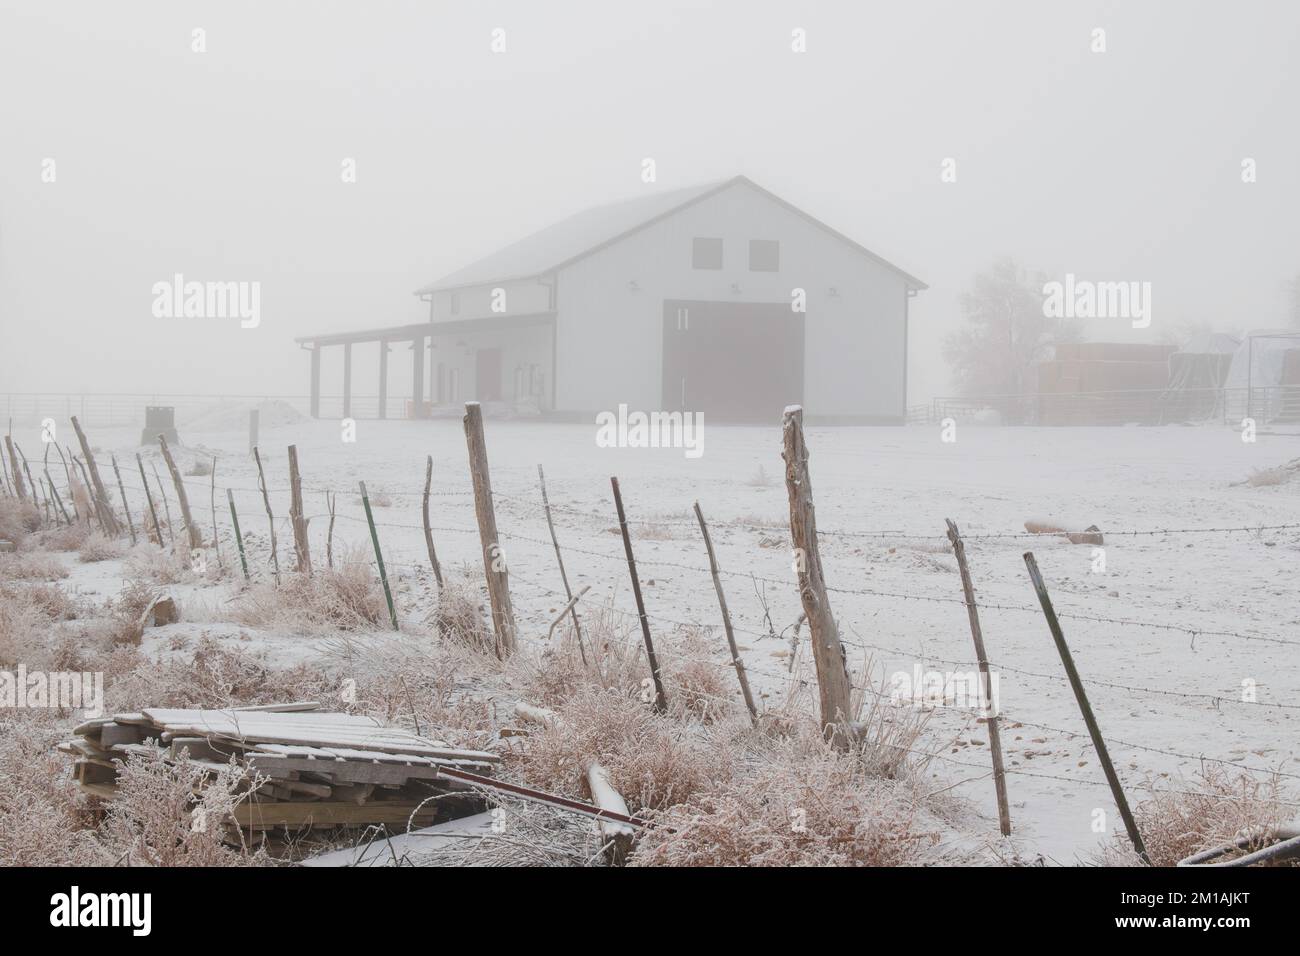 Big White Farm Barn in the Distance on a Cold Foggy Winter Morning Stock Photo